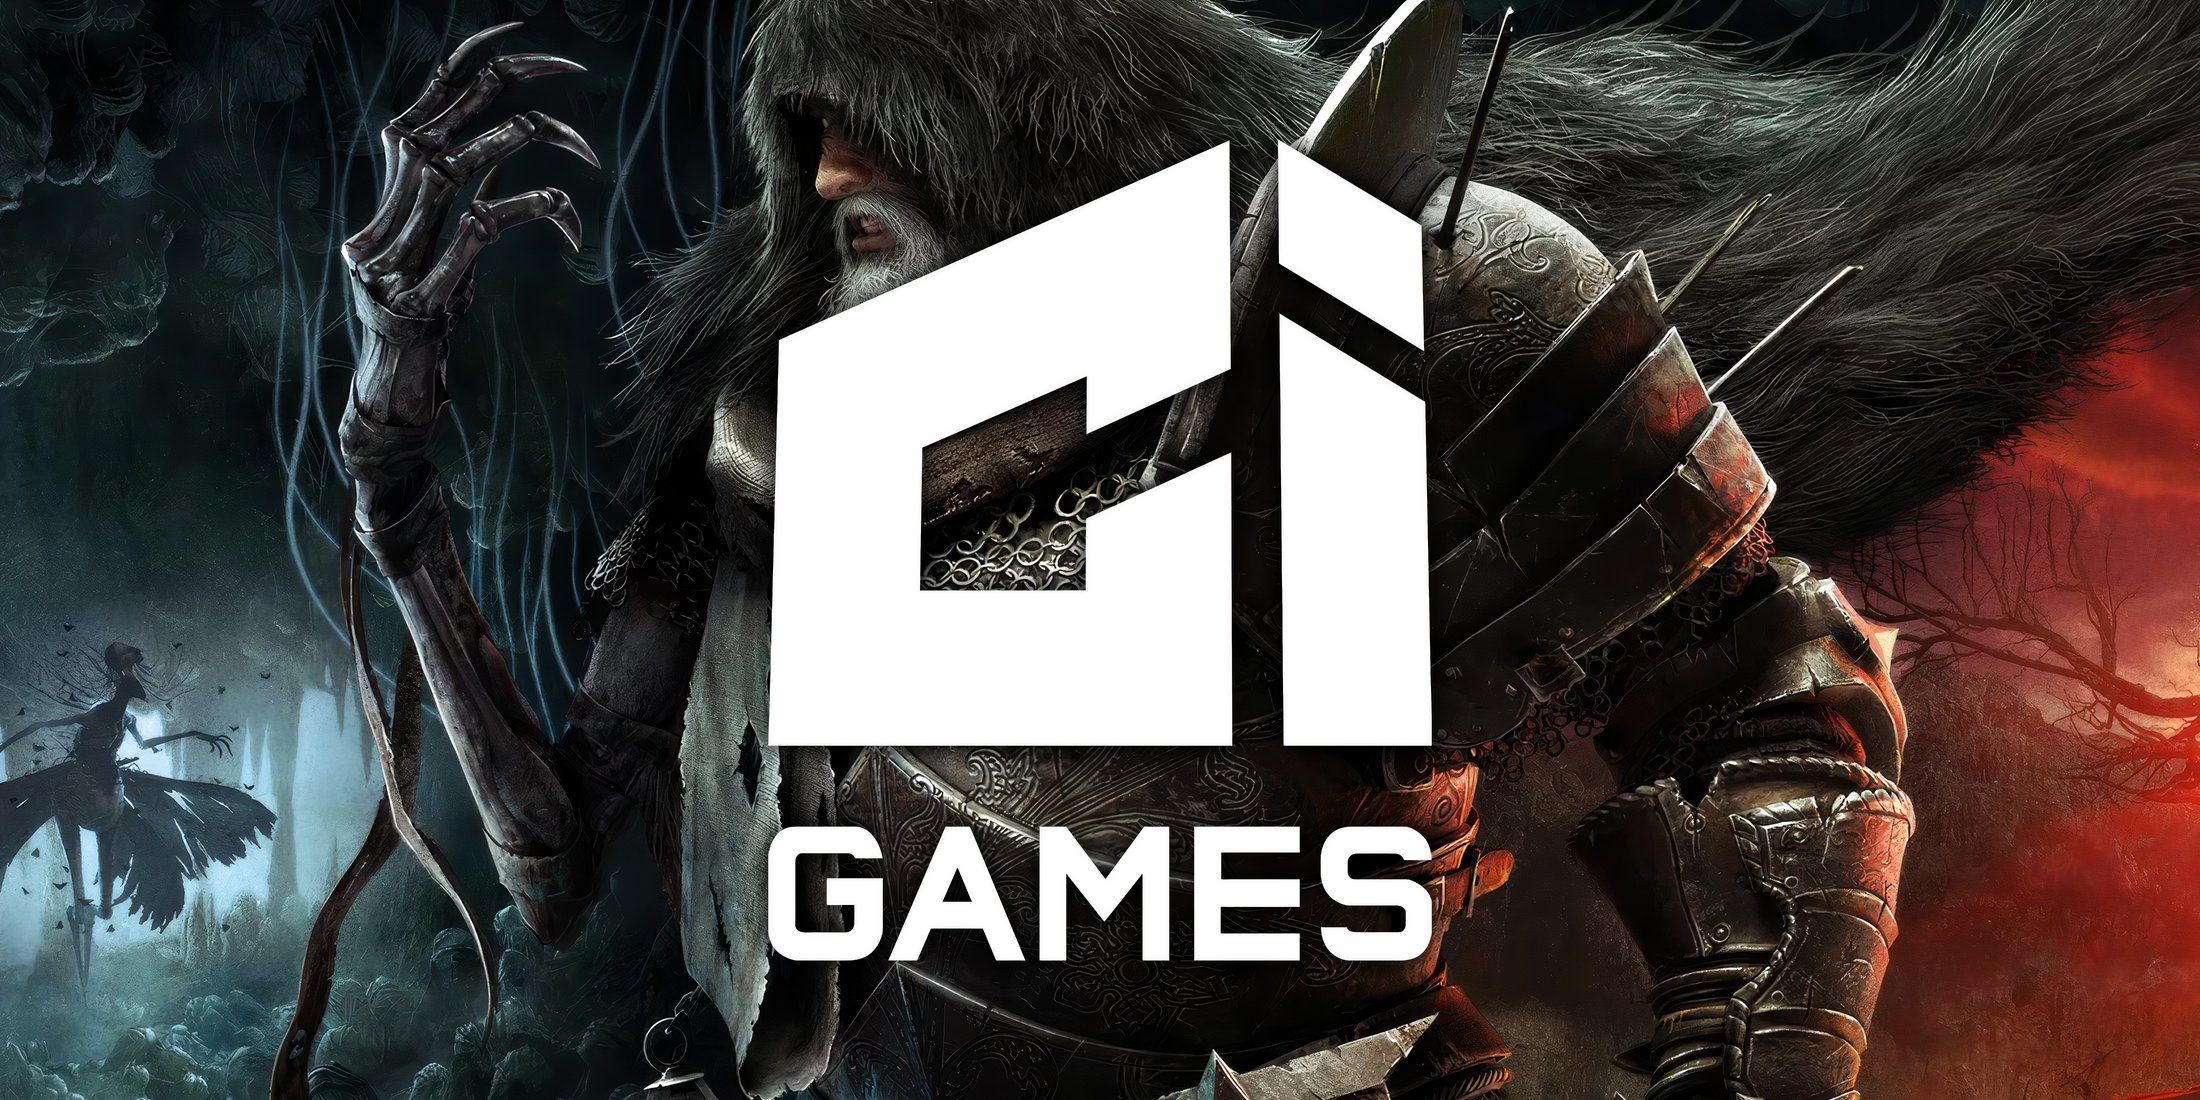 lords-of-the-fallen-ci-games-logo-game-rant